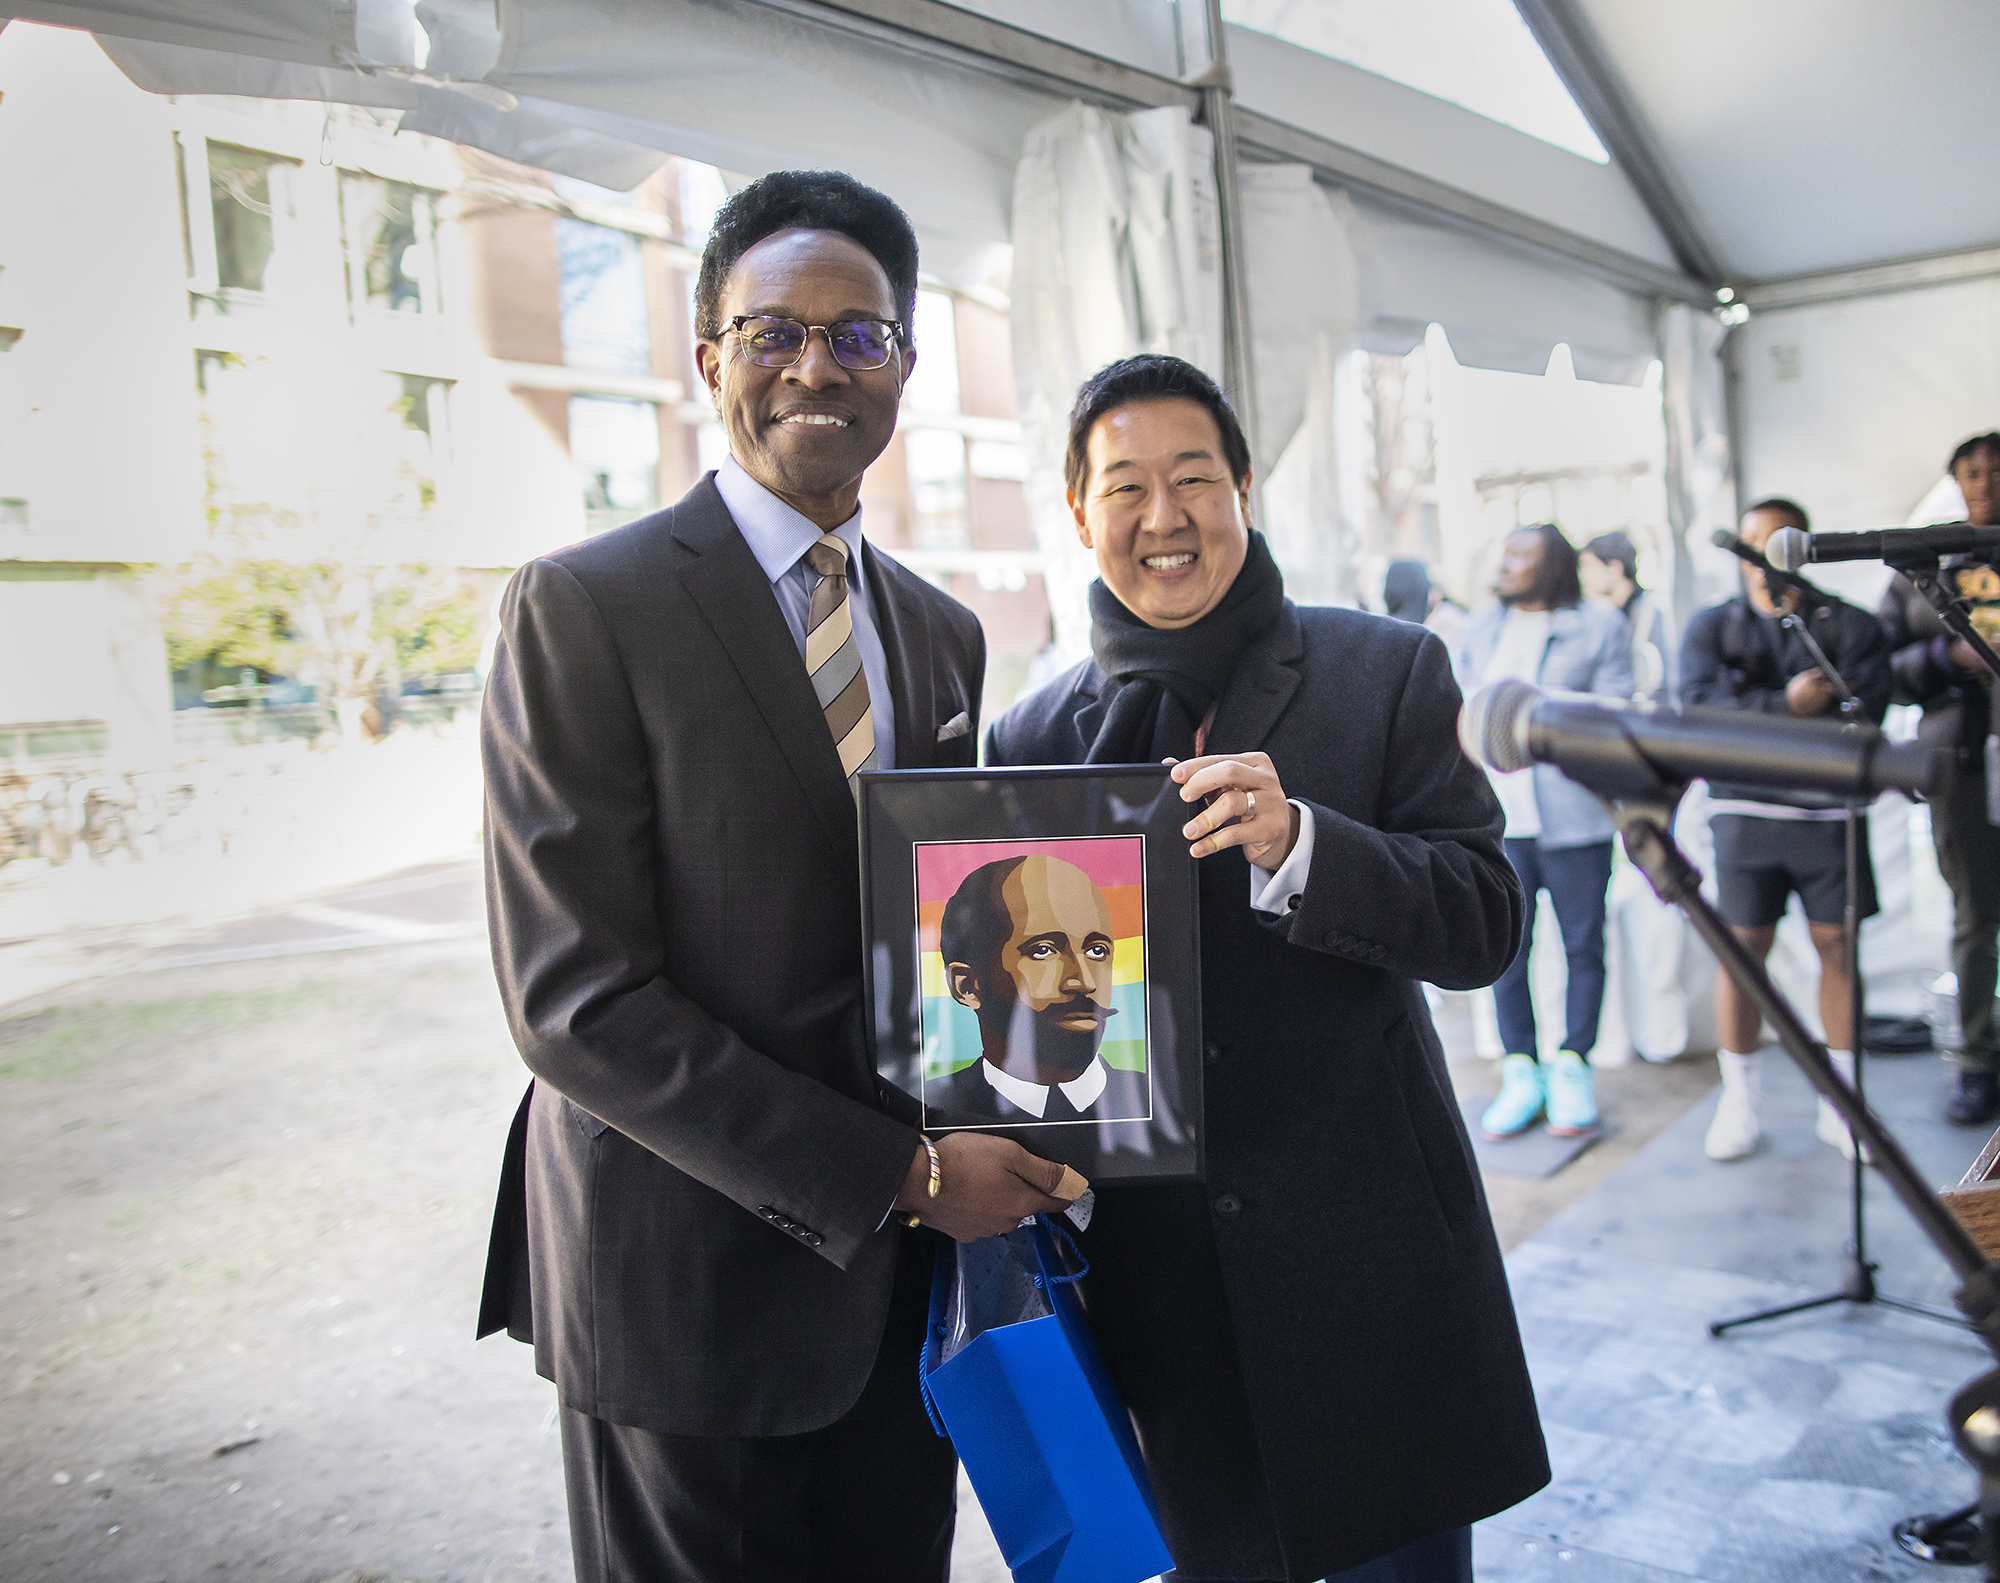 Karu with Will Gipson holding an image of W.E.B. Du Bois